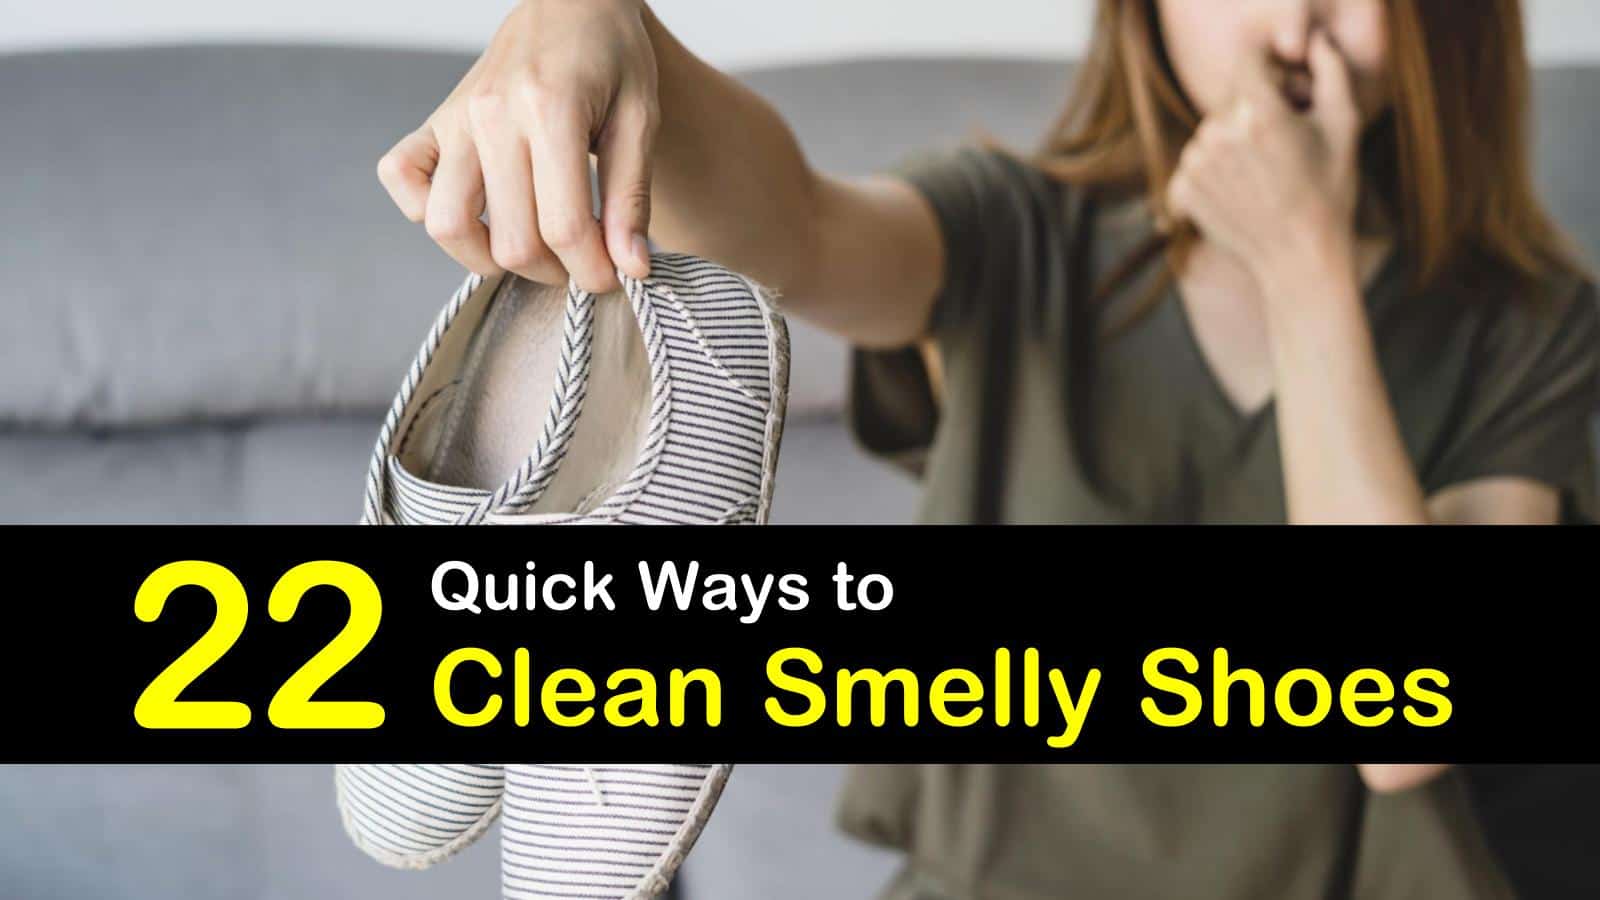 how to clean smelly shoes titleimg1